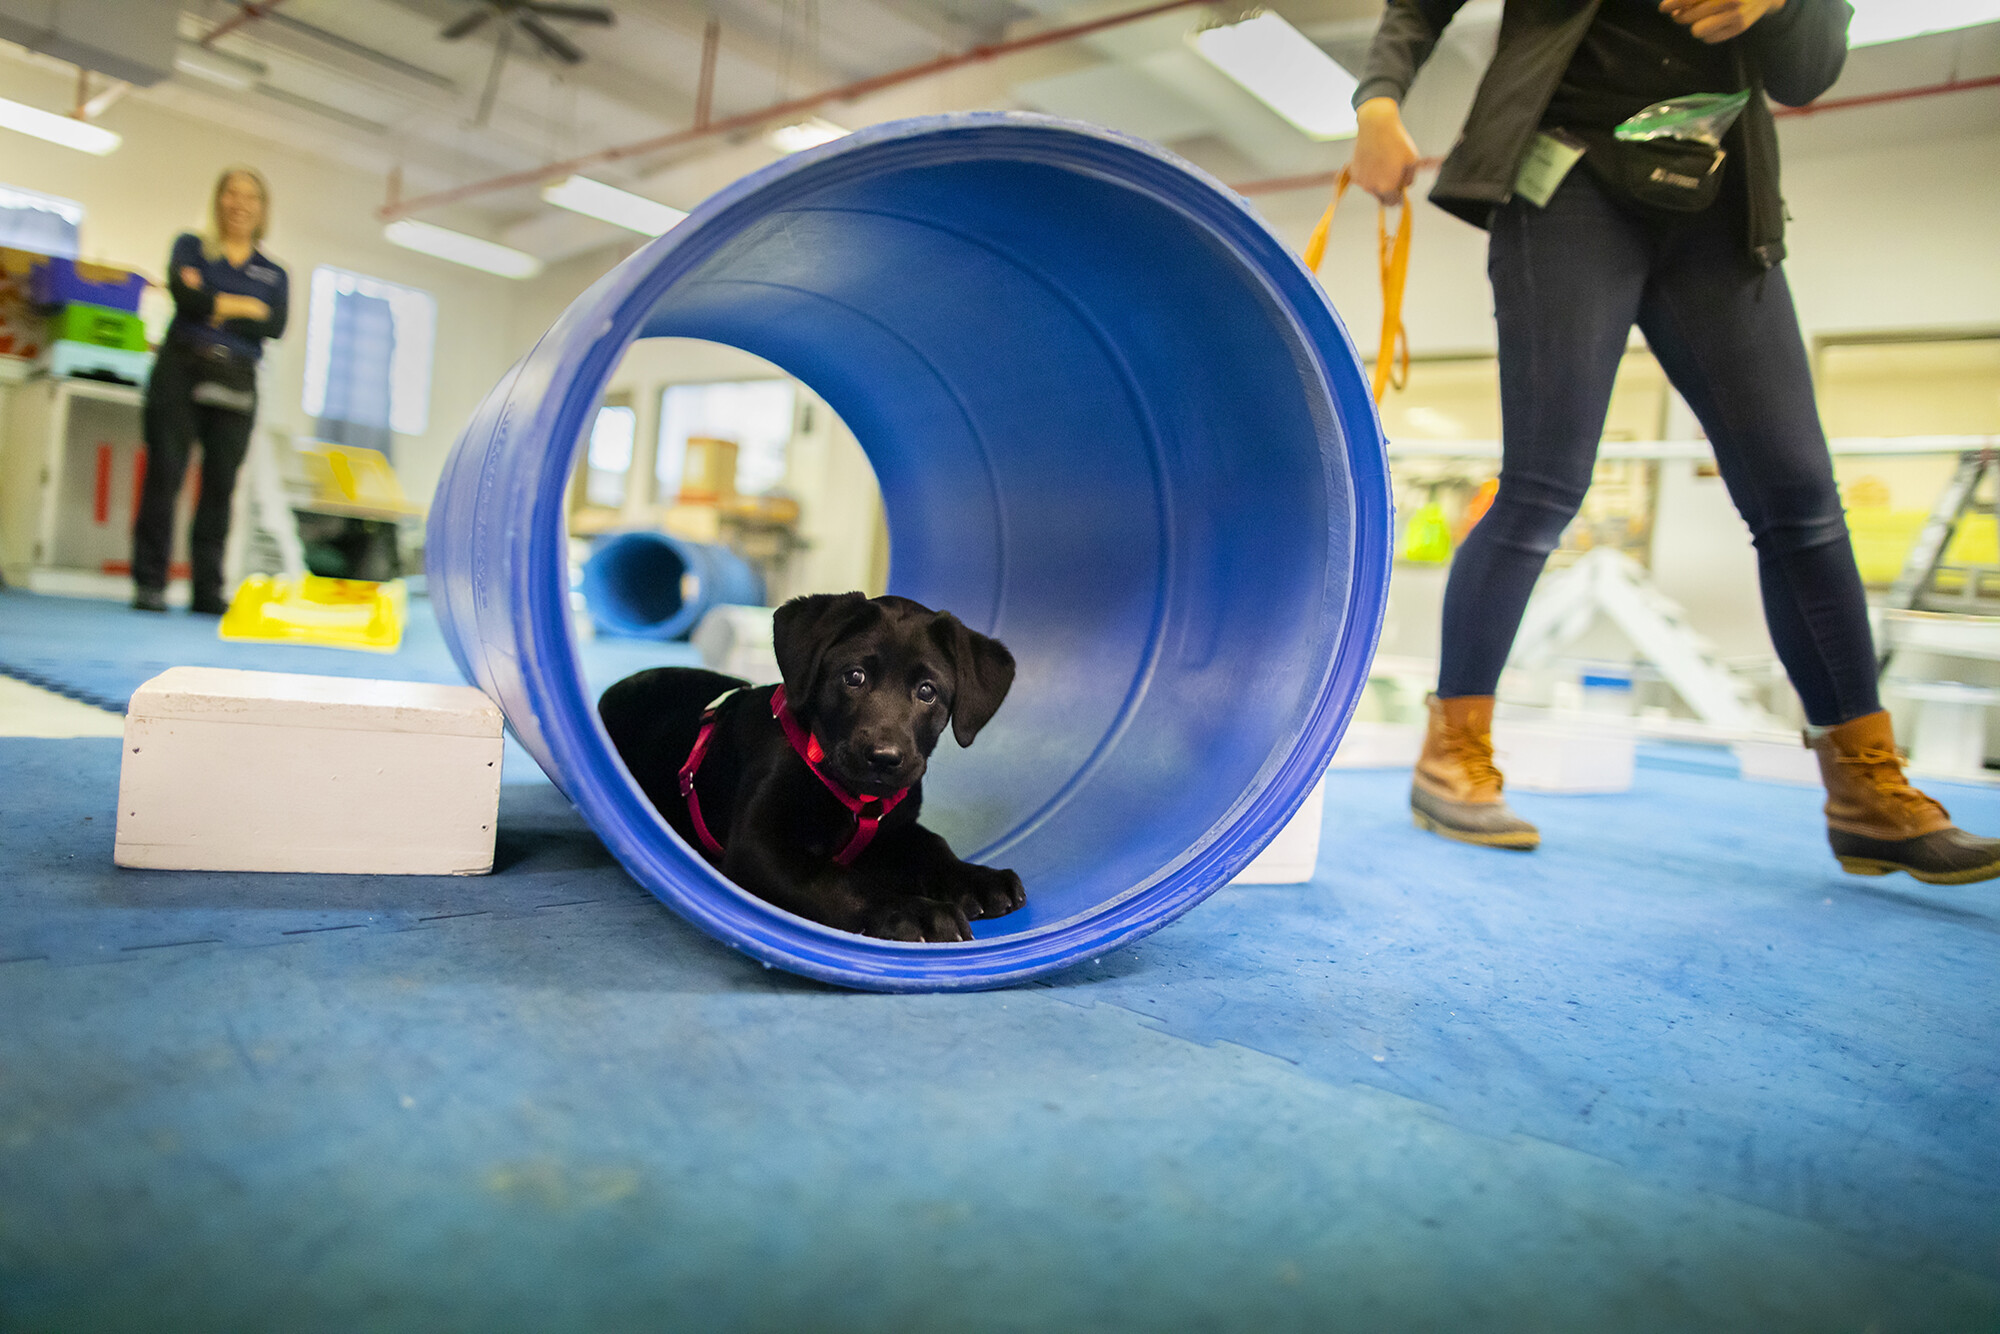 One of the U-litter puppies at the Working Dog Center sits in a tunnel